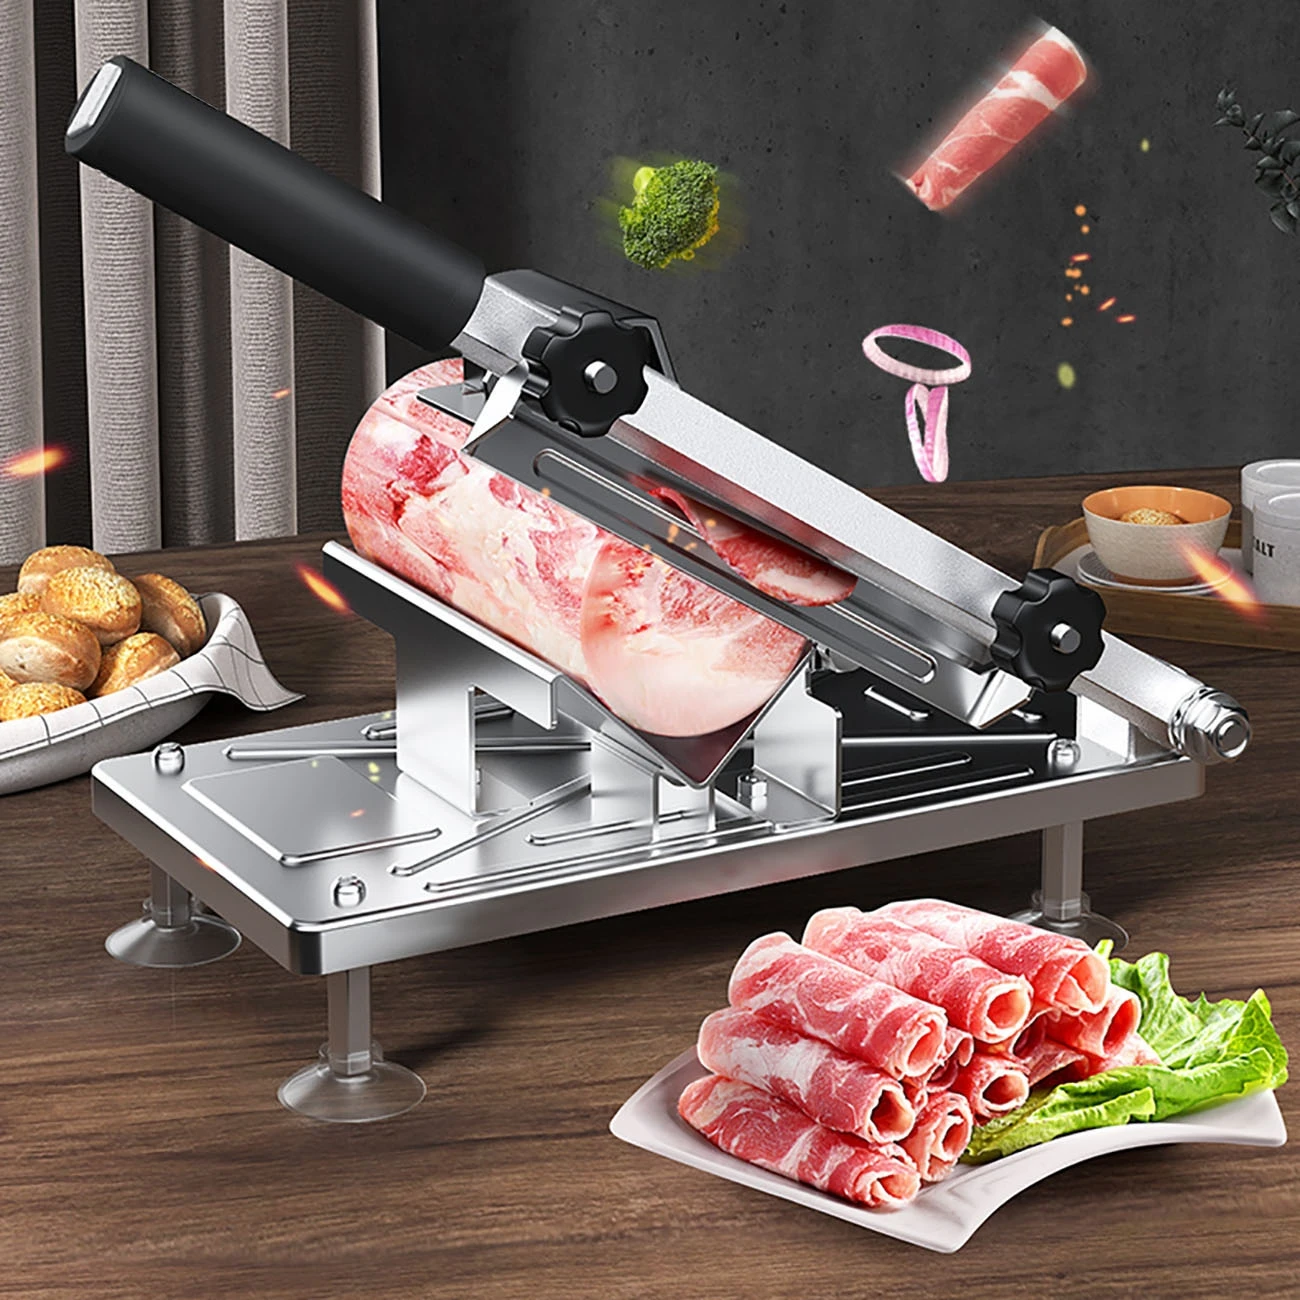 

Stainless Steel Spring Automatic Meat Delivery Food Cutter Slicing Machine Manual Slicer Fat Beef Roll Lamb Roll Meat Cutter